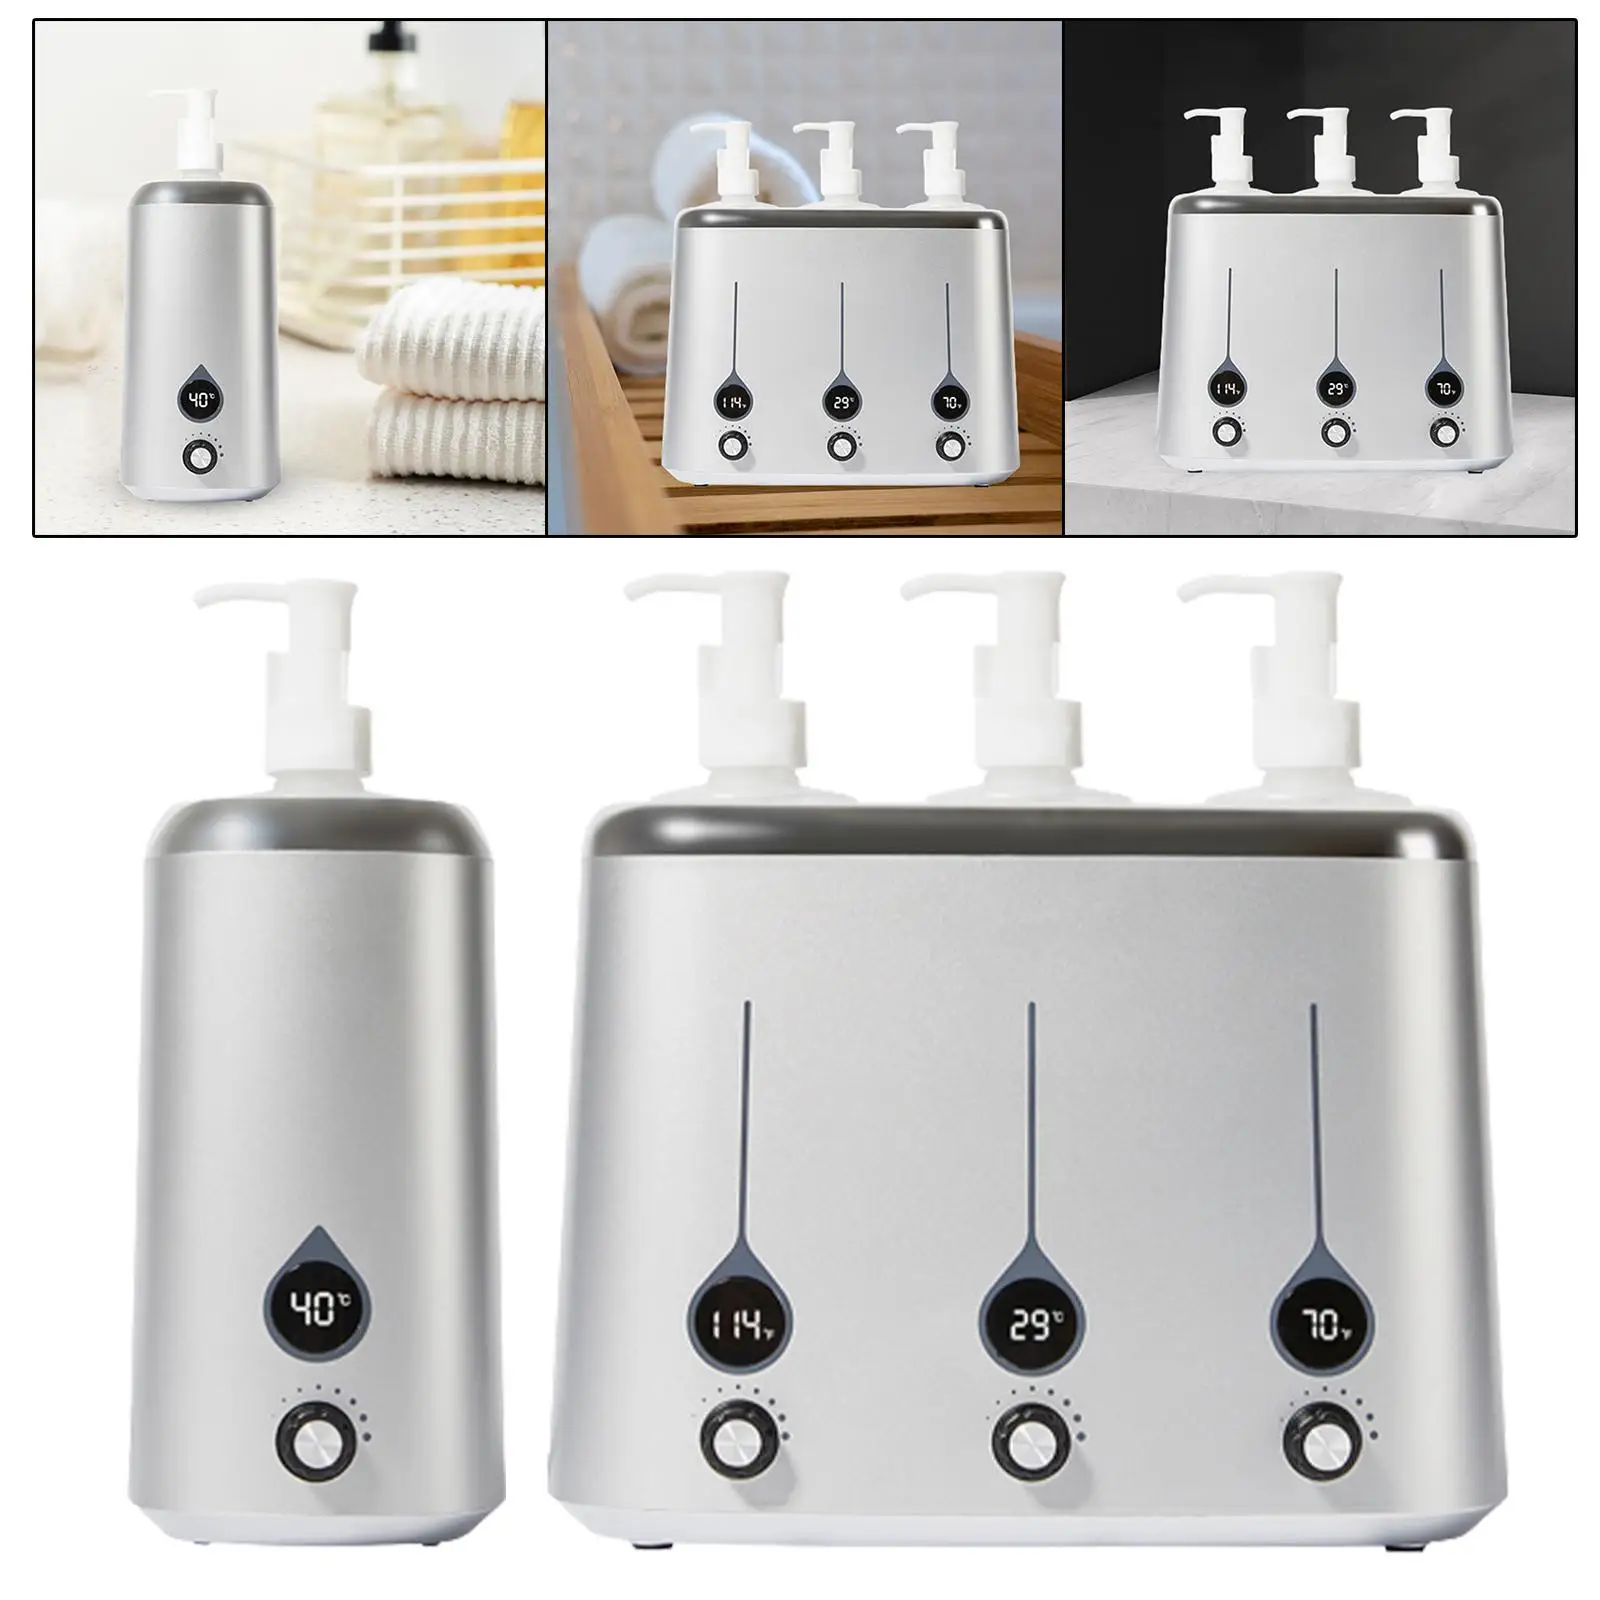 Massage Oil Warmer Adjustable Temperature Fast Heating LED Screen Lotion Warmer for Home Use Hotel Salon SPA massage Shop